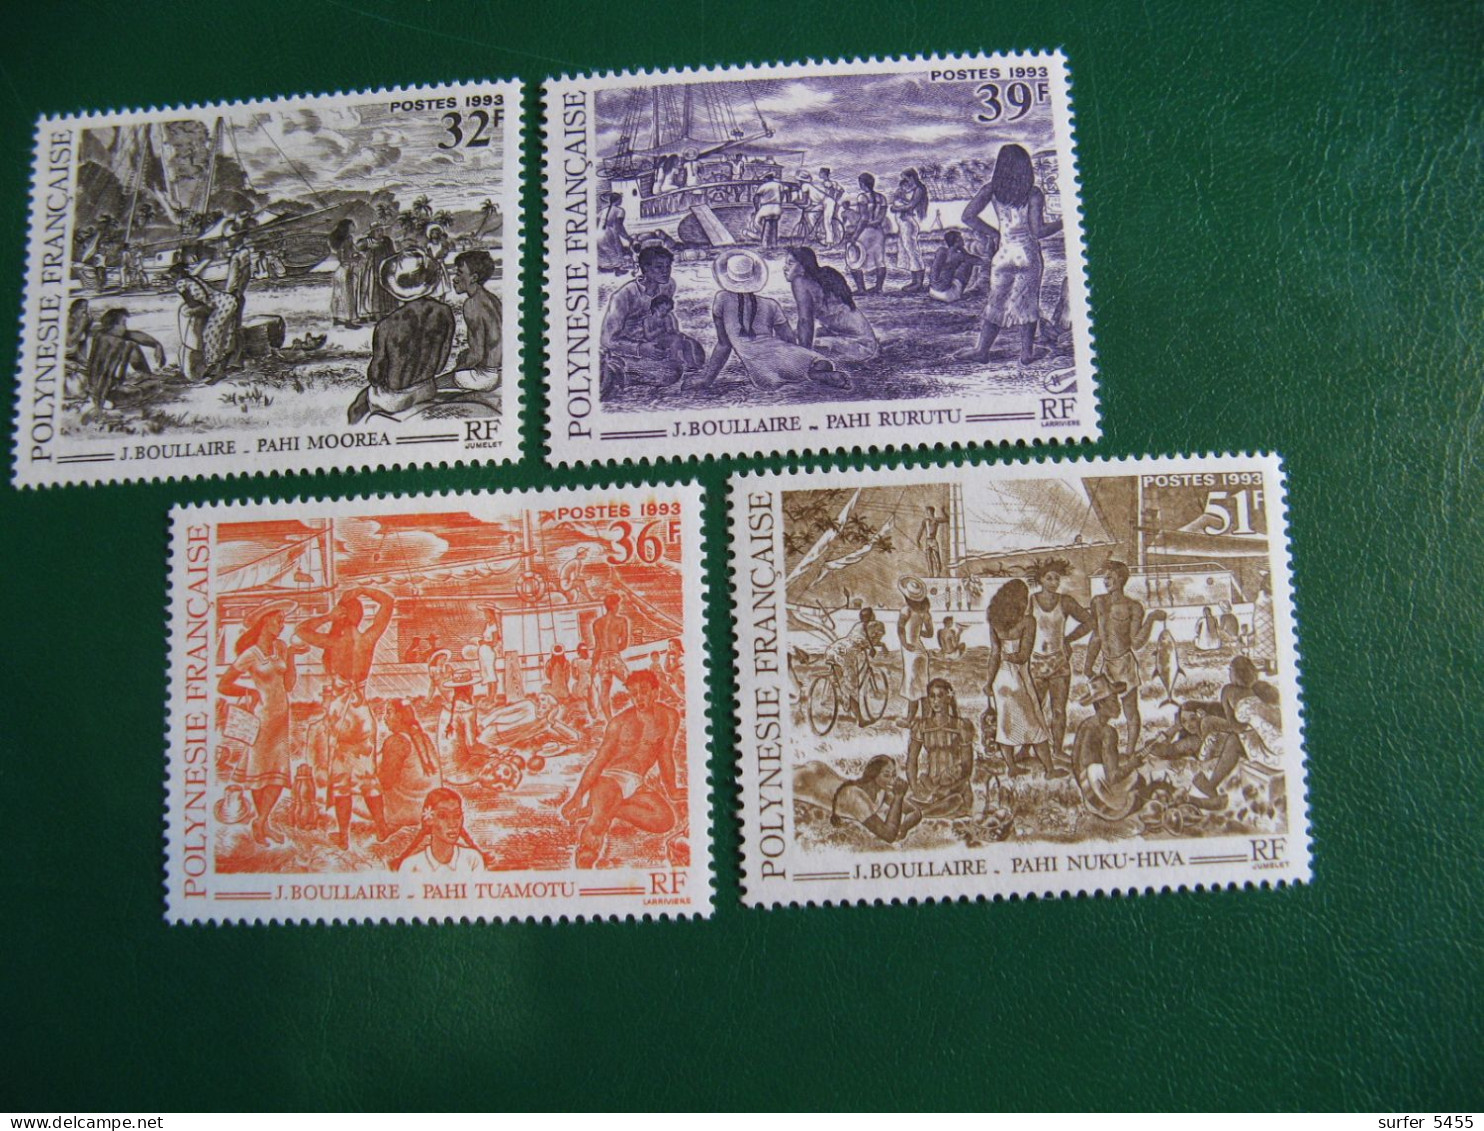 P0LYNESIE YVERT PO ORDINAIRE N° 432/435 TIMBRES NEUFS ** LUXE - MNH - SERIE COMPLETE - FACIALE 1,33 EURO - Ungebraucht